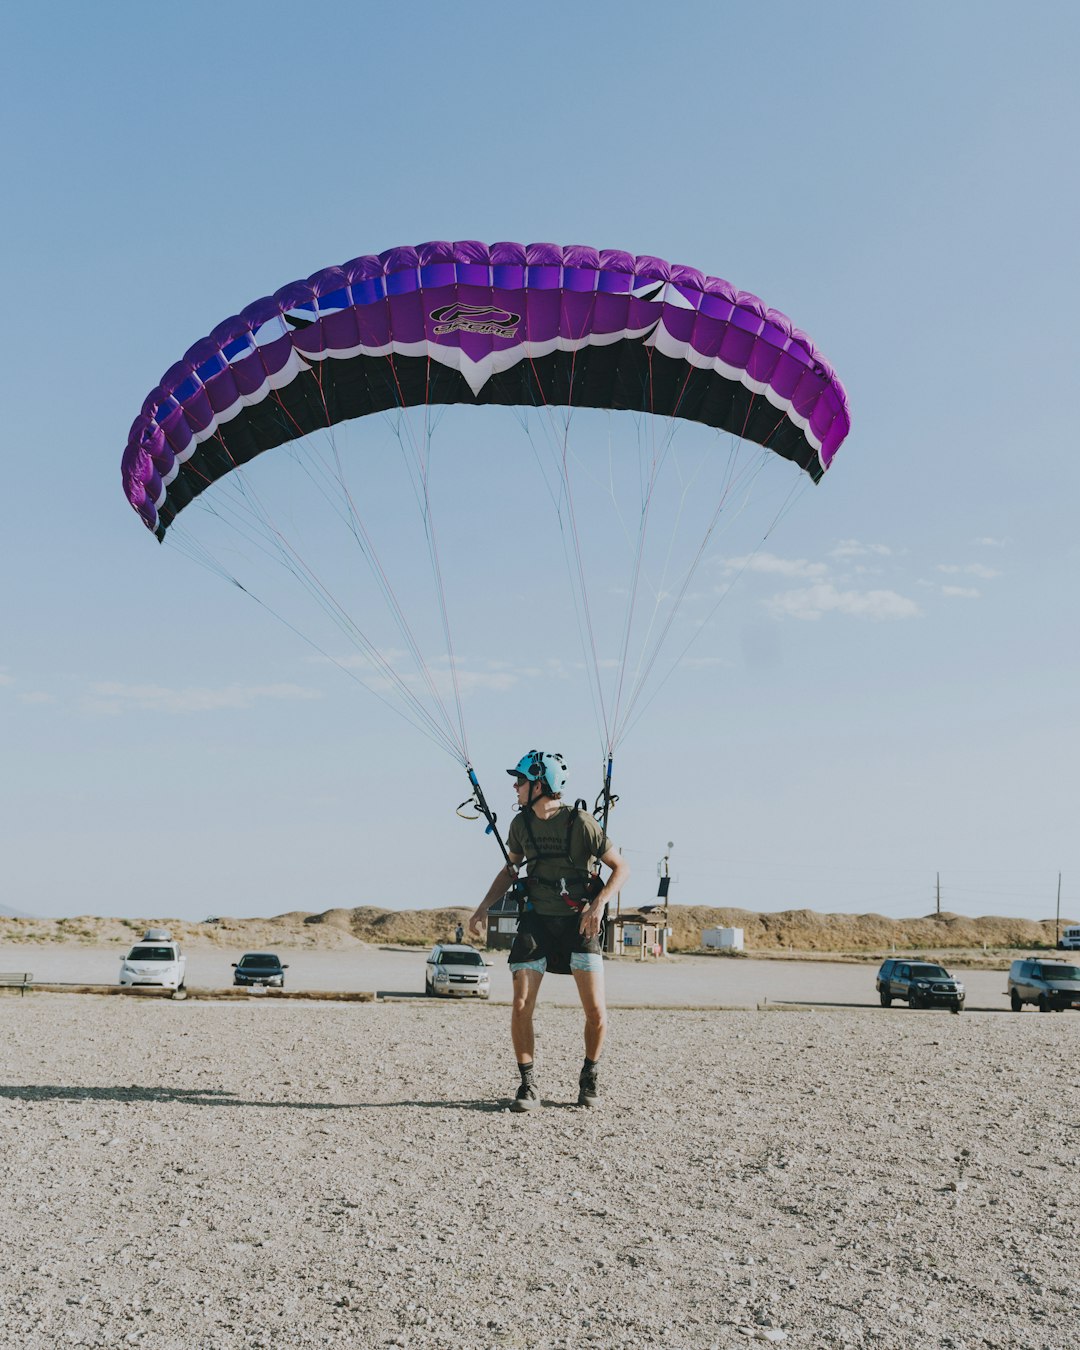 man in black shirt and shorts riding on blue and white parachute